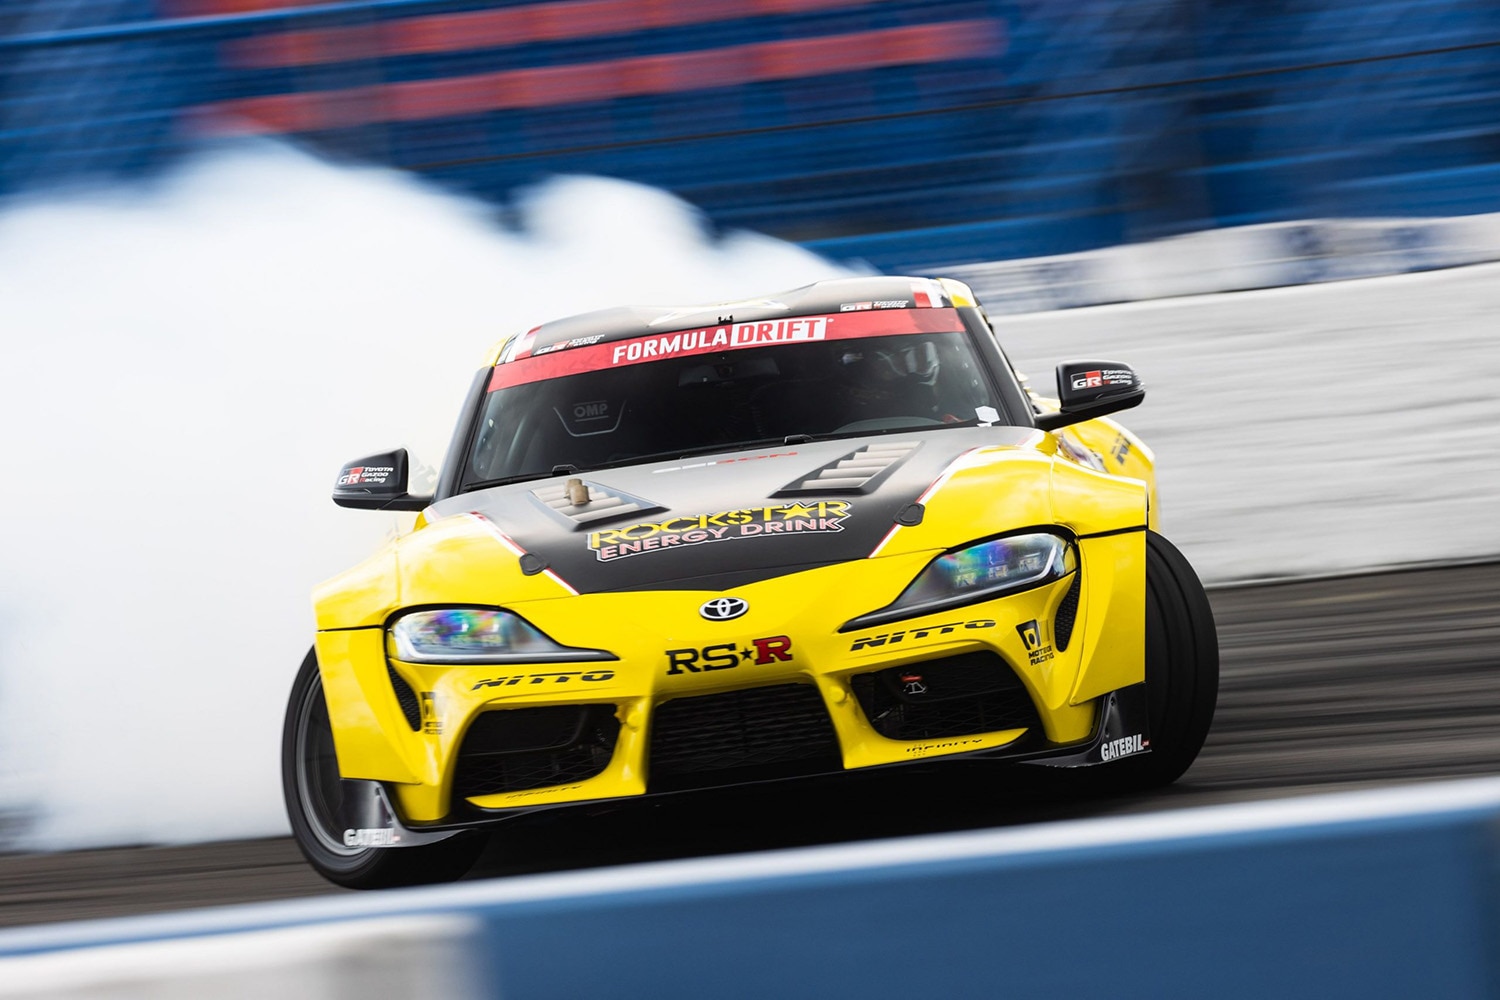 Toyota Supra in yellow race livery leaving a wake of white smoke while drifting around a track